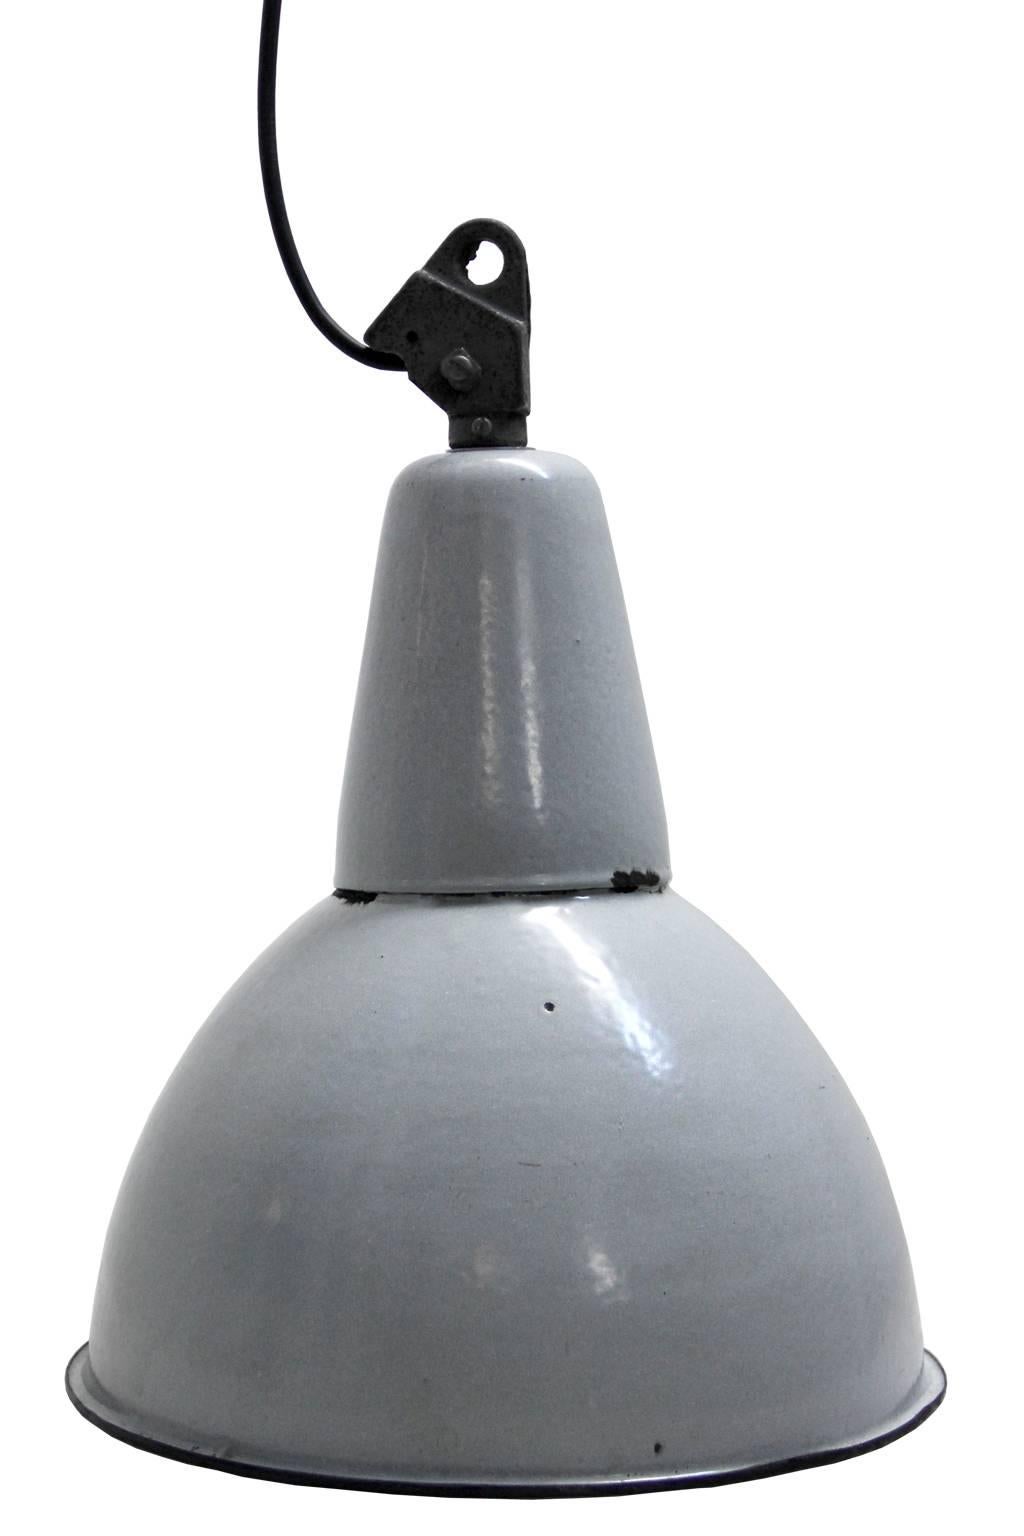 Industrial pendant.
Gray enamel white interior.

Weight: 2.0 kg / 4.4 lb

Priced per individual item. All lamps have been made suitable by international standards for incandescent light bulbs, energy-efficient and LED bulbs. E26/E27 bulb